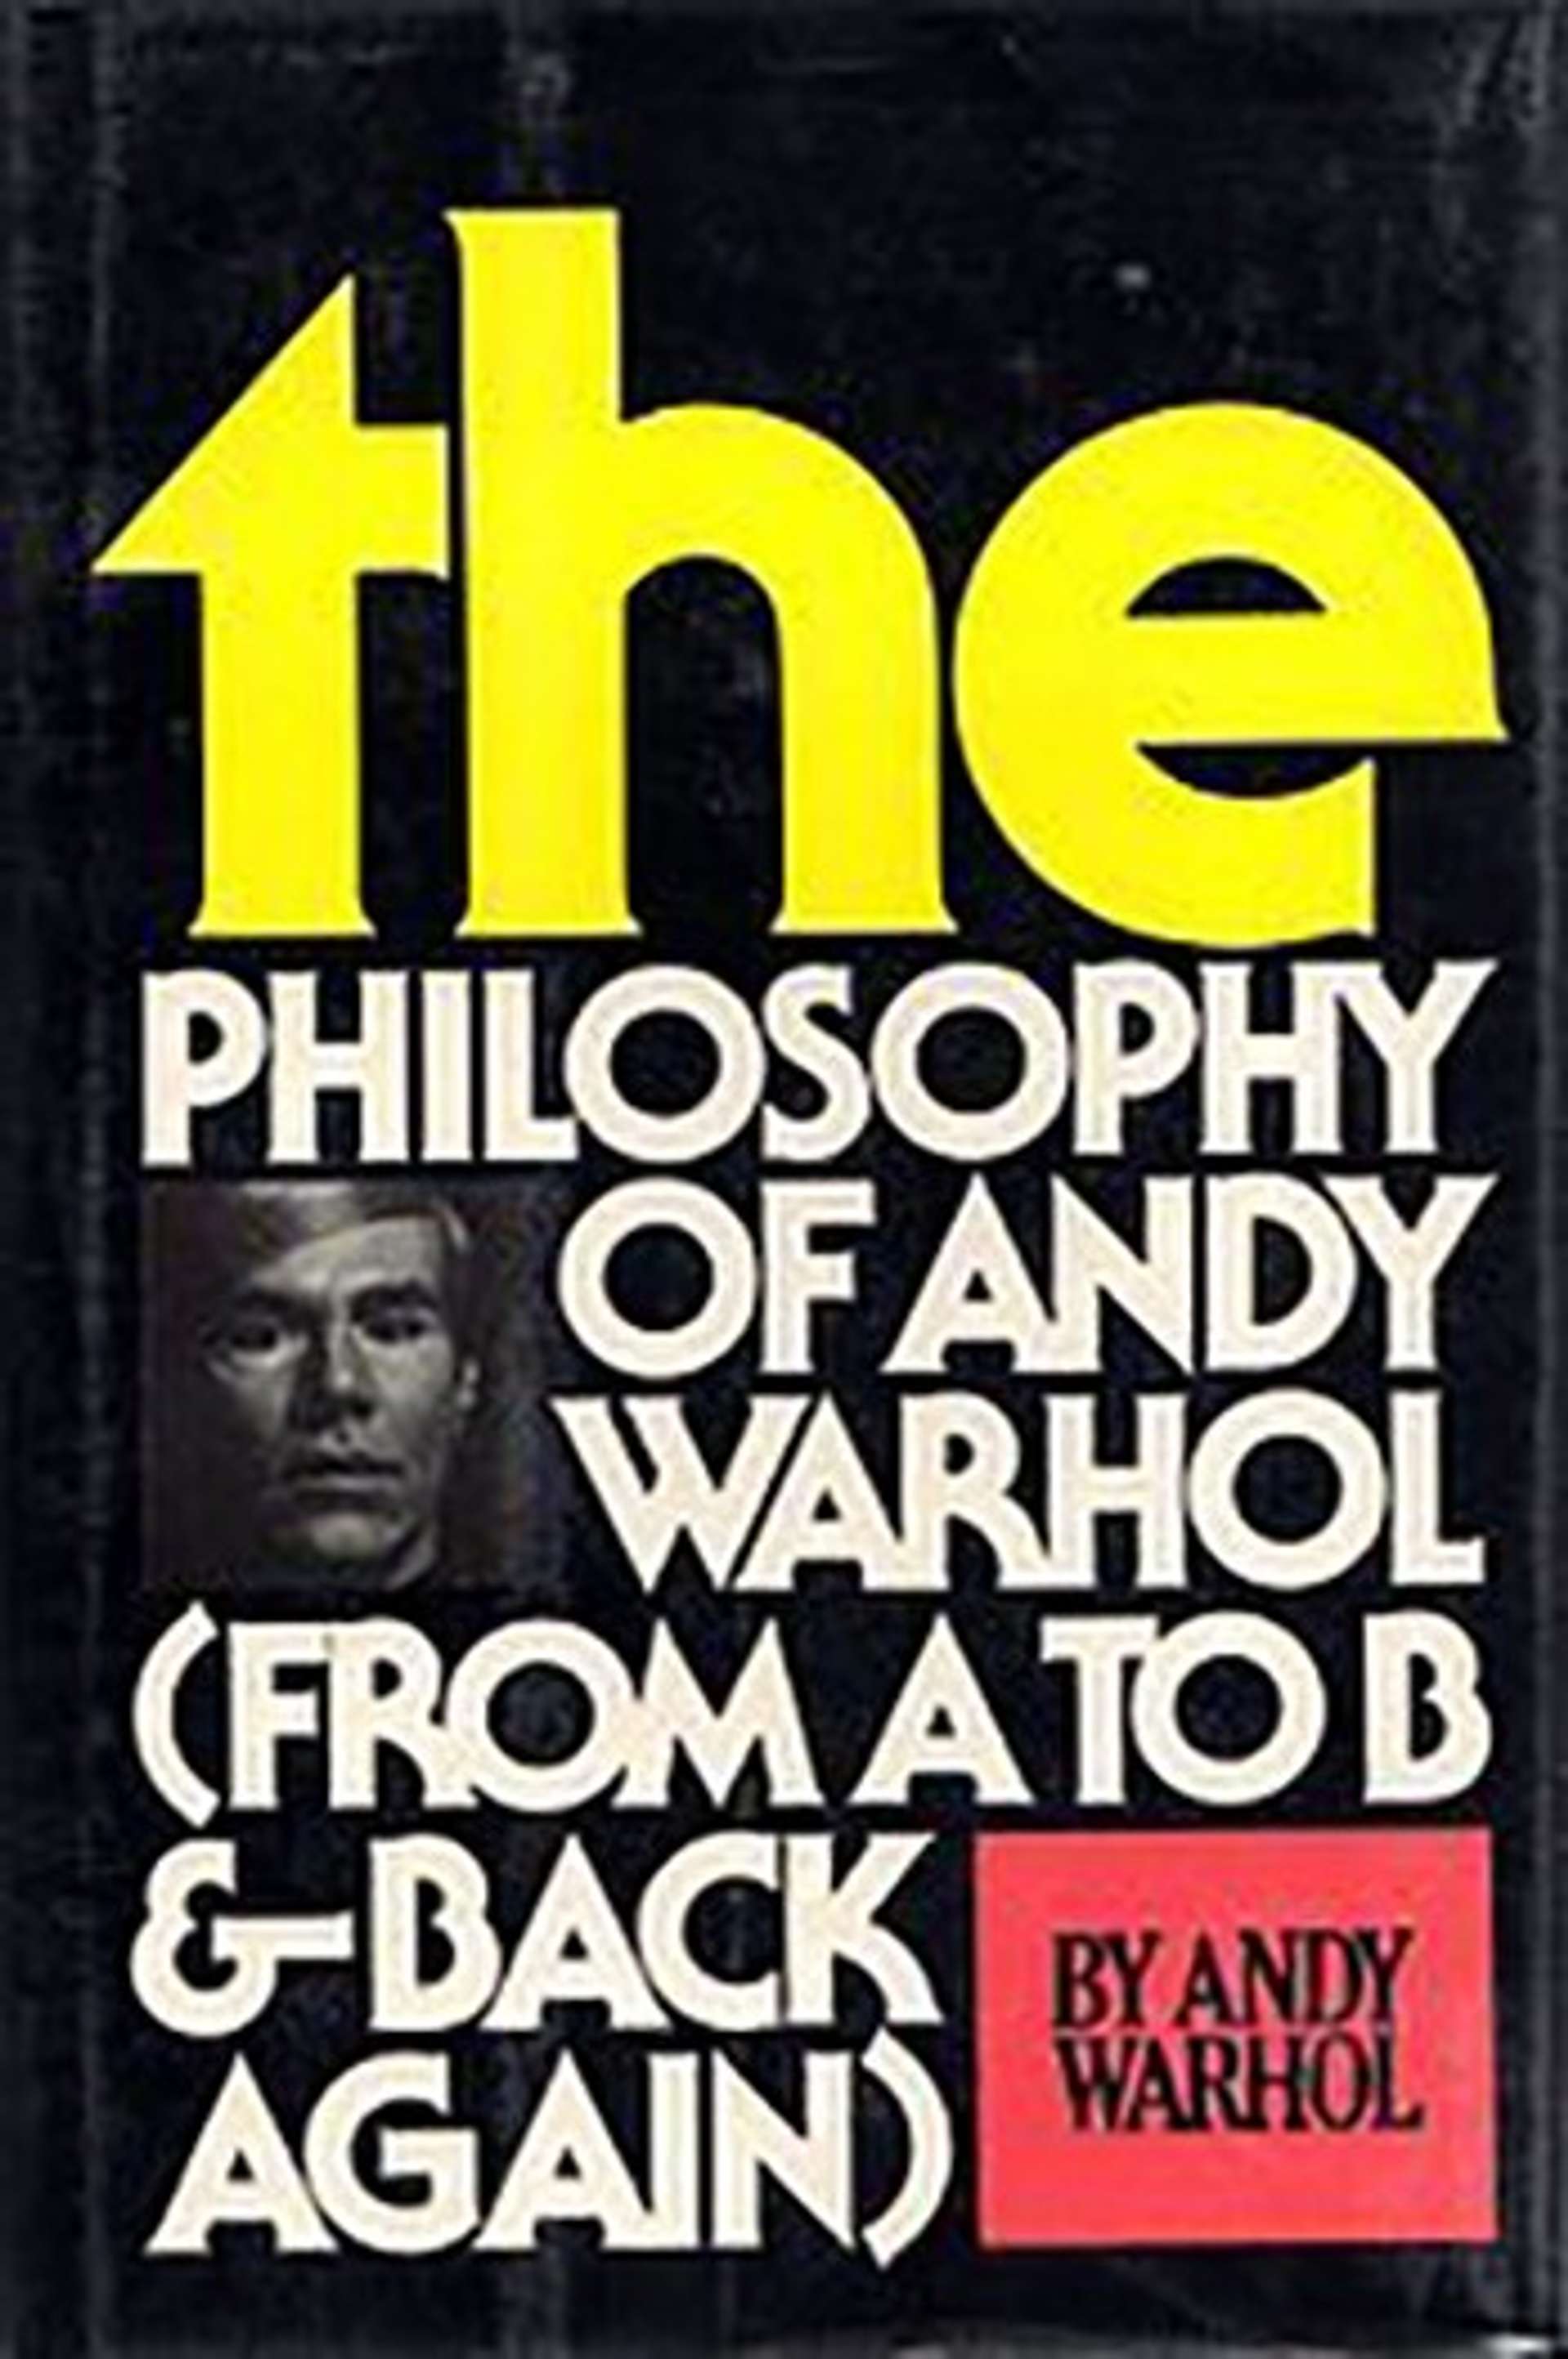 The Philosophy Of Andy Warhol (From A to B & Back Again) by Andy Warhol